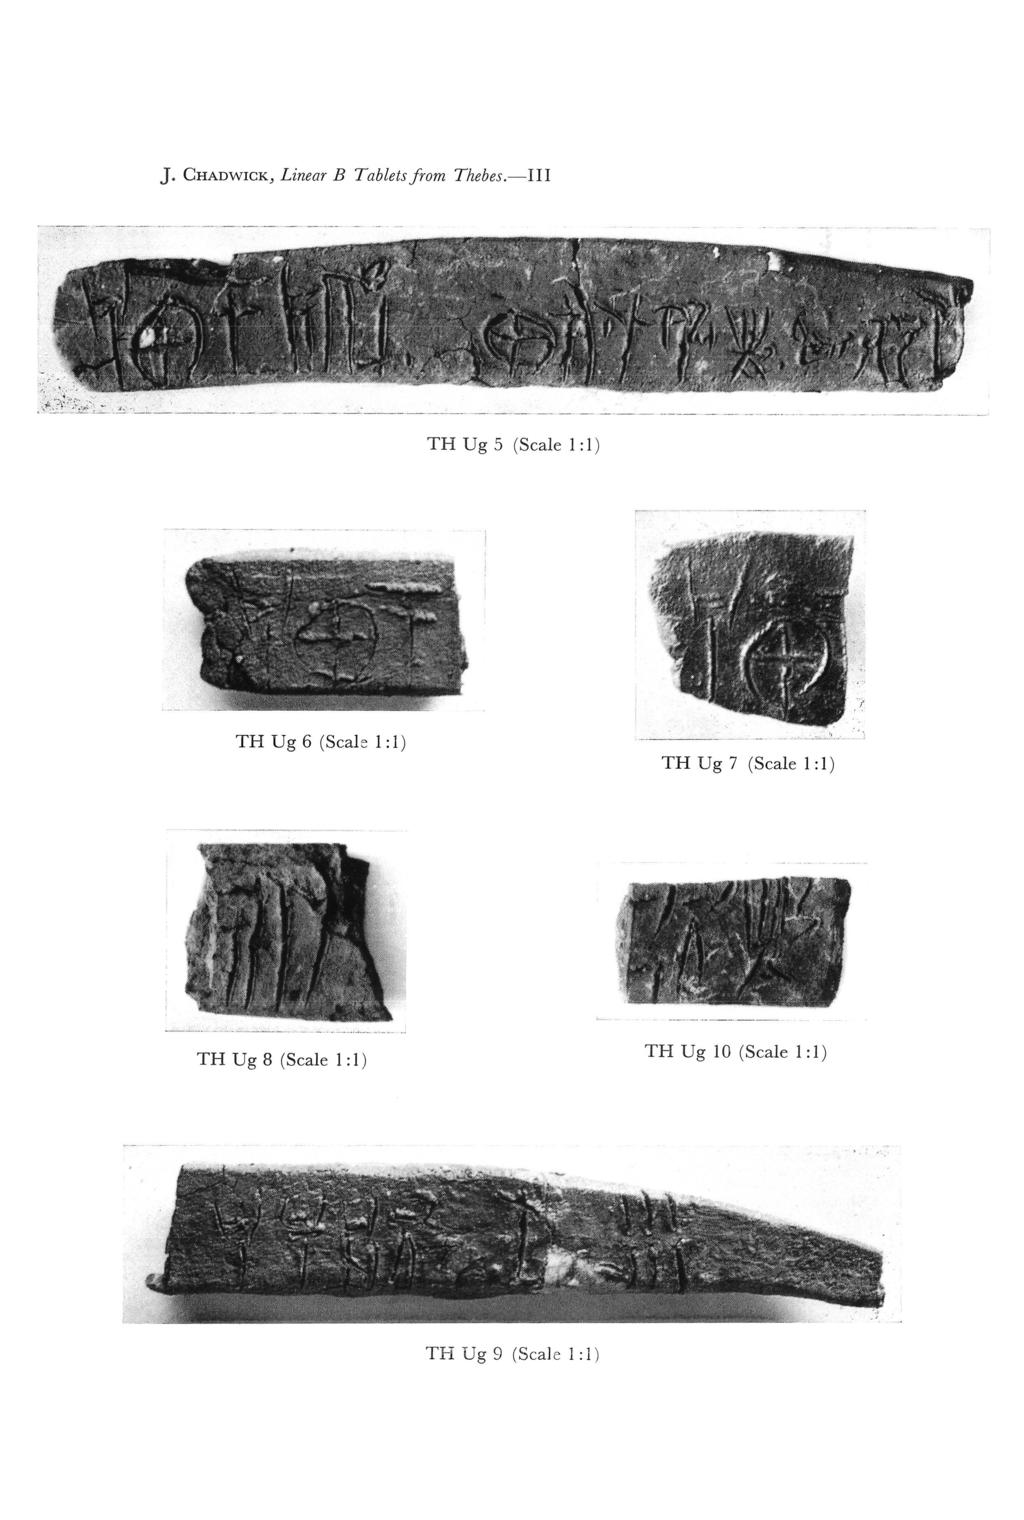 J. CHADWICK, Linear B Tablets from Thebes.